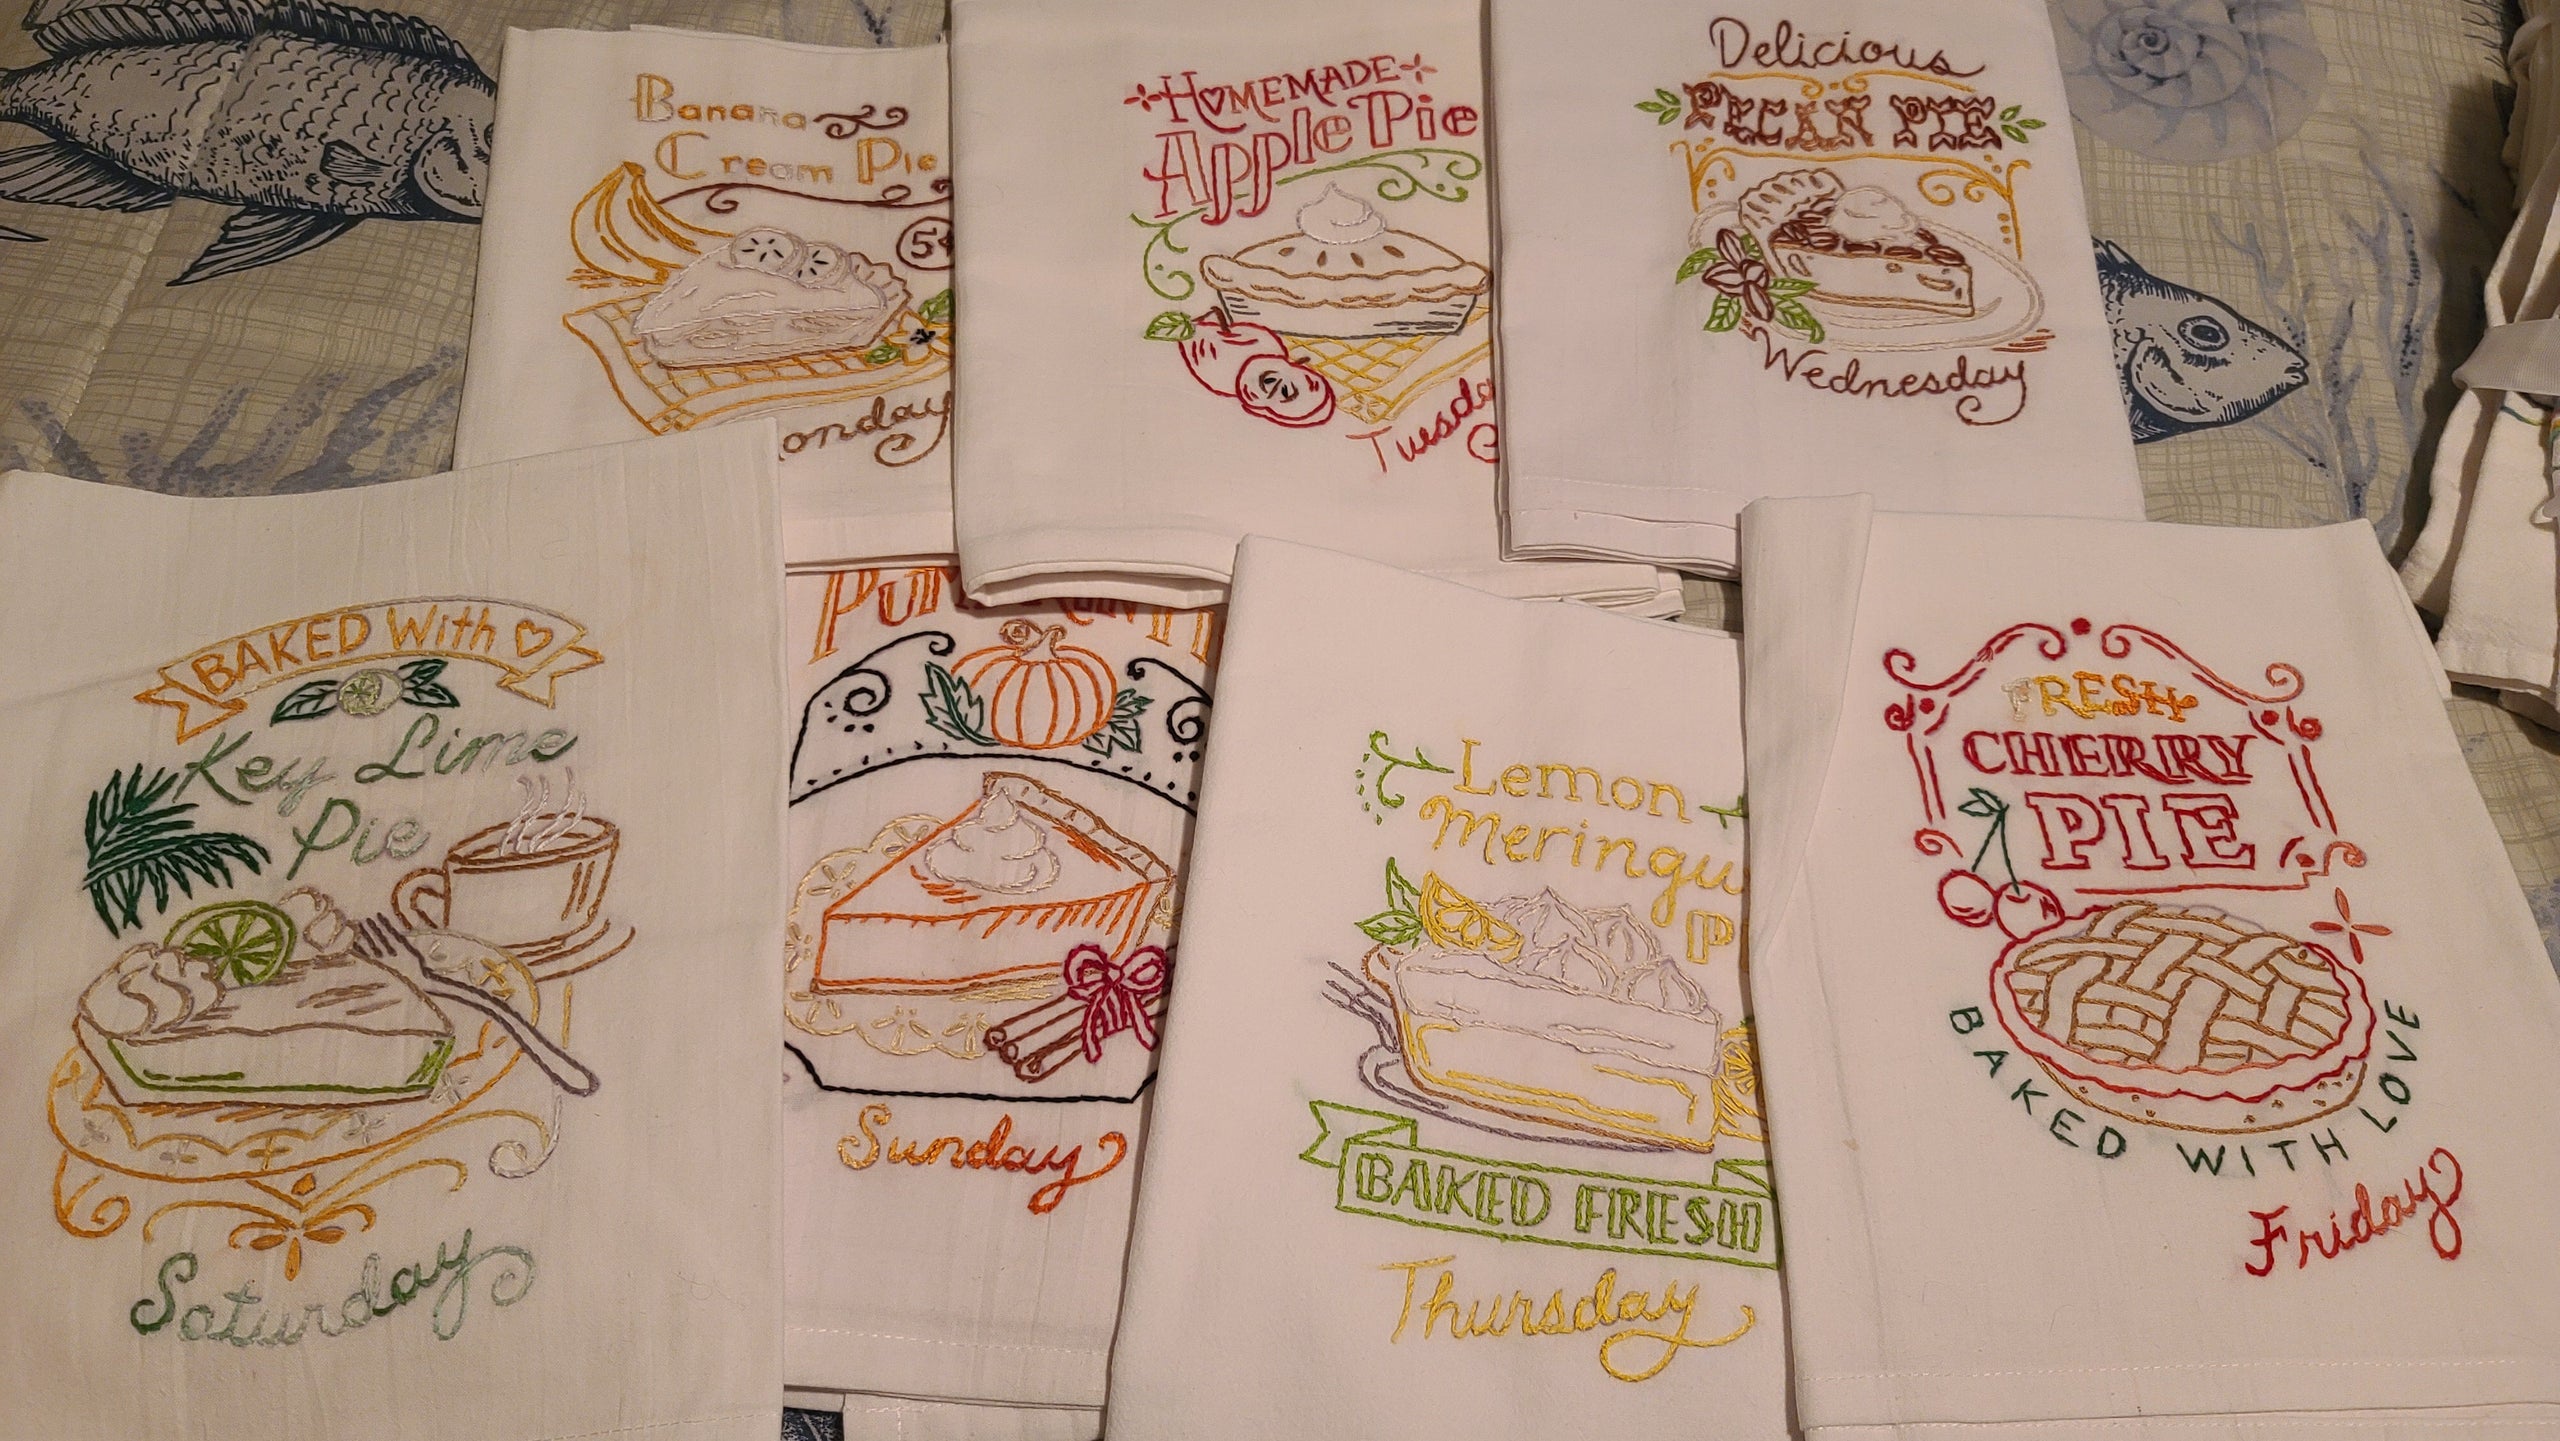 More Star Wars Dish towels  Embroidery projects, Dish towels, Embroidery